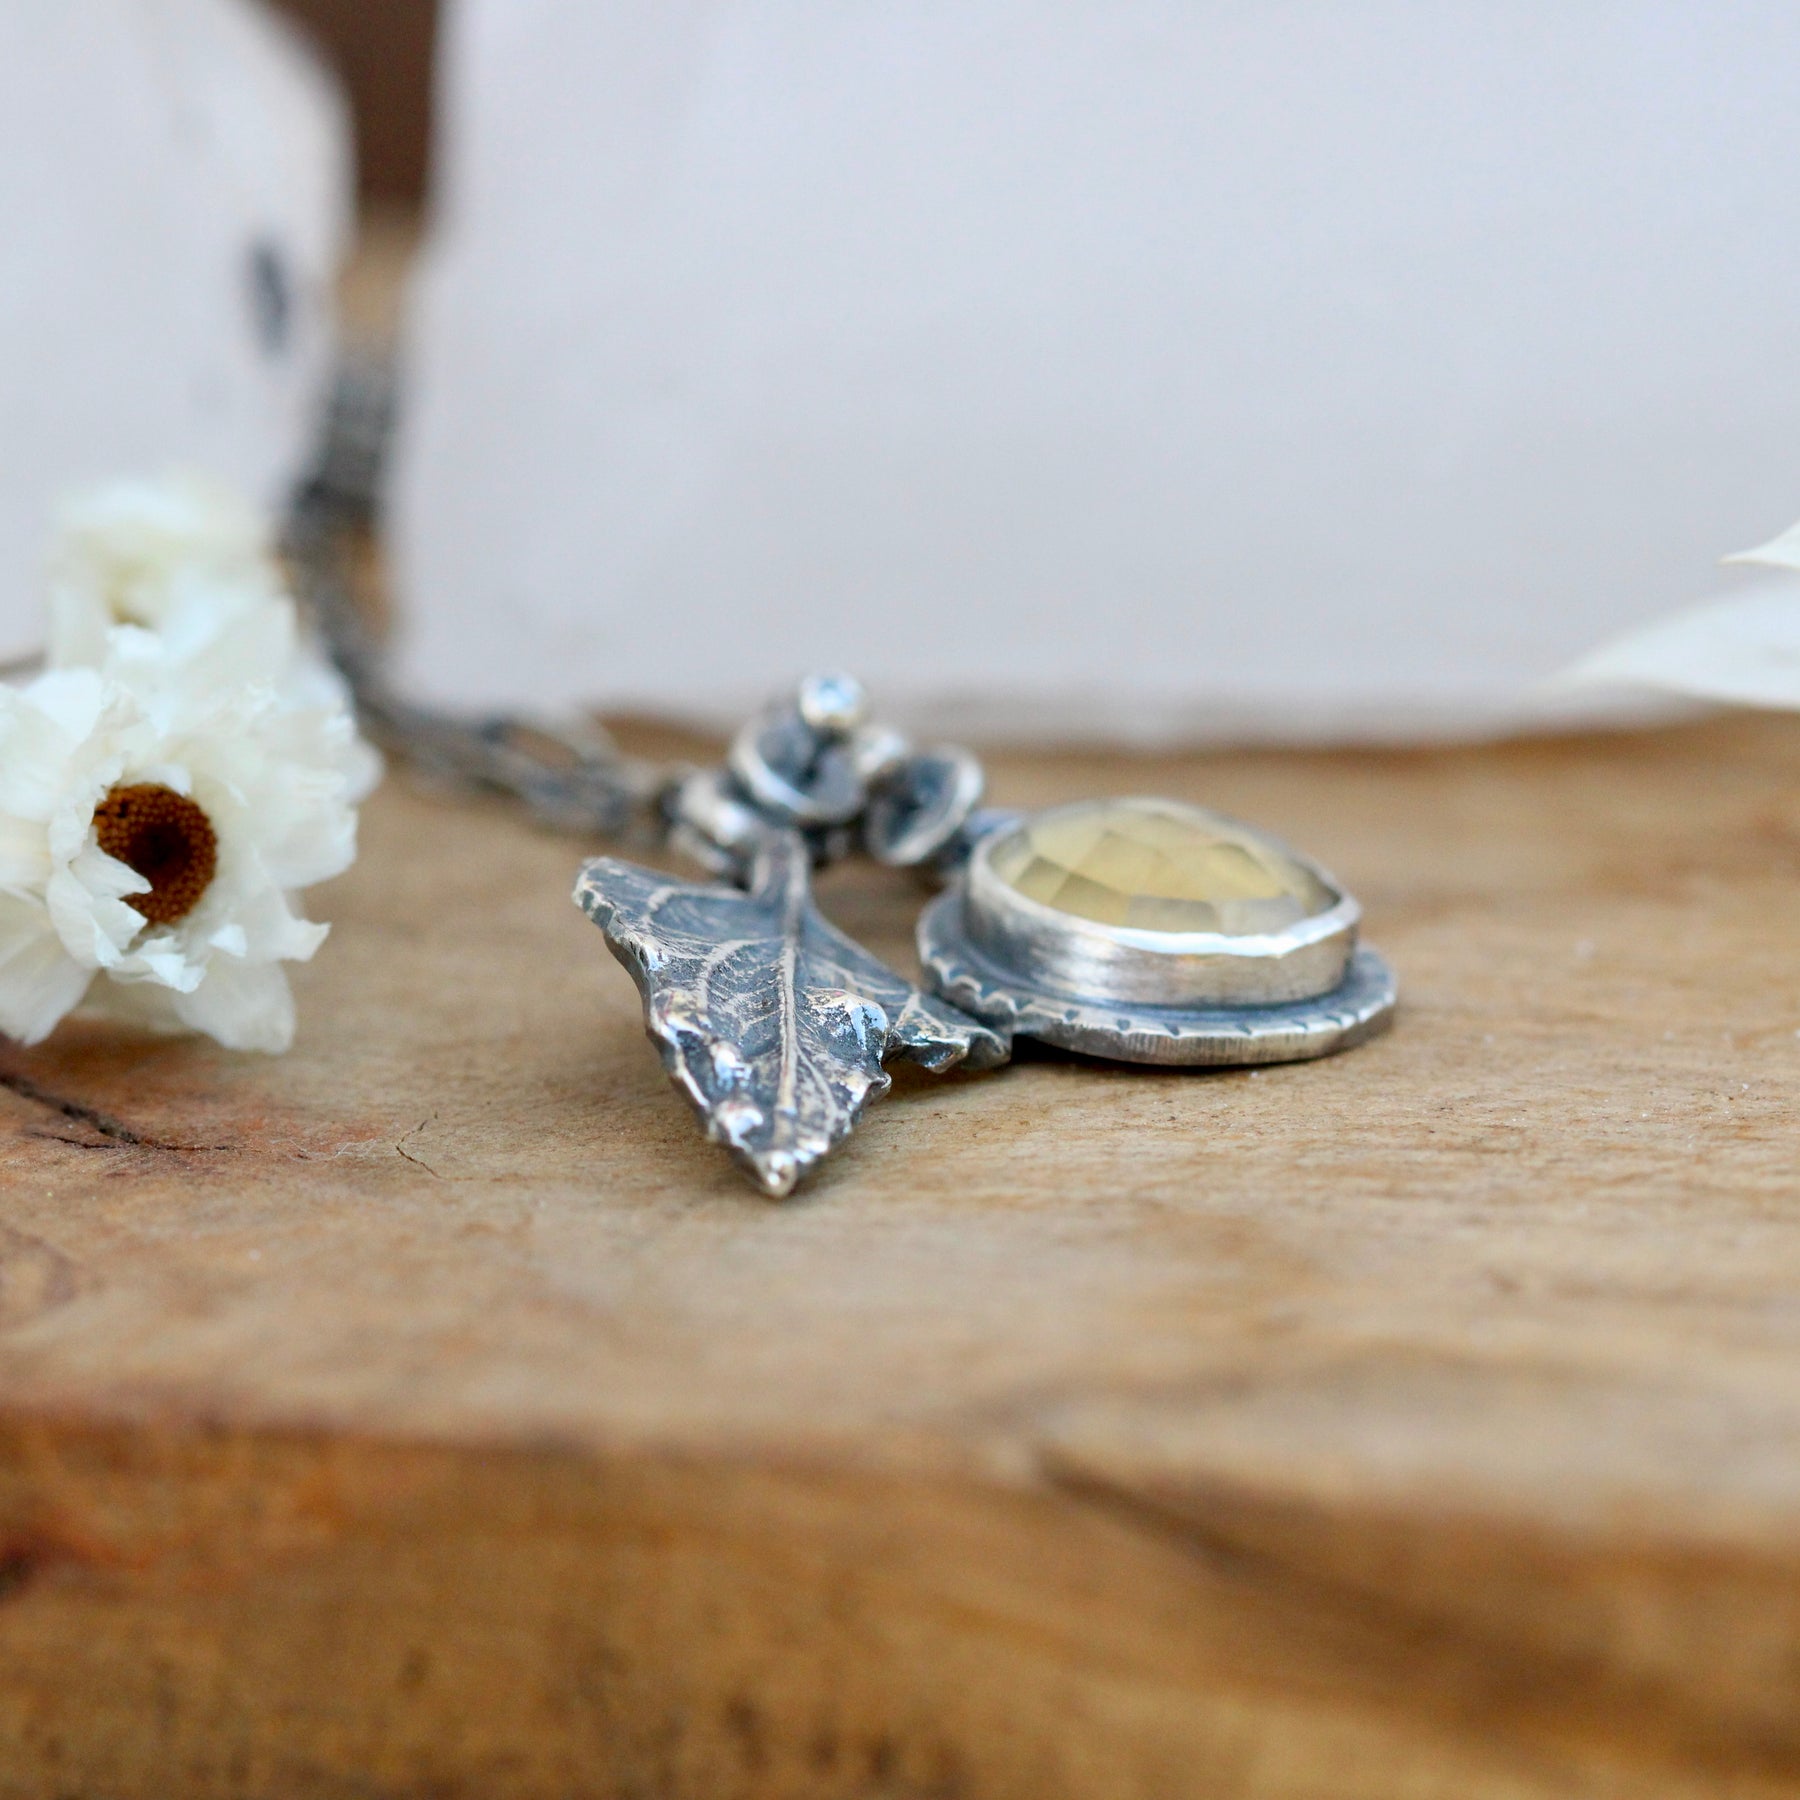 Clearance Sale  Wildflower Wanderings Citrine with Brittlebush Leaf necklace